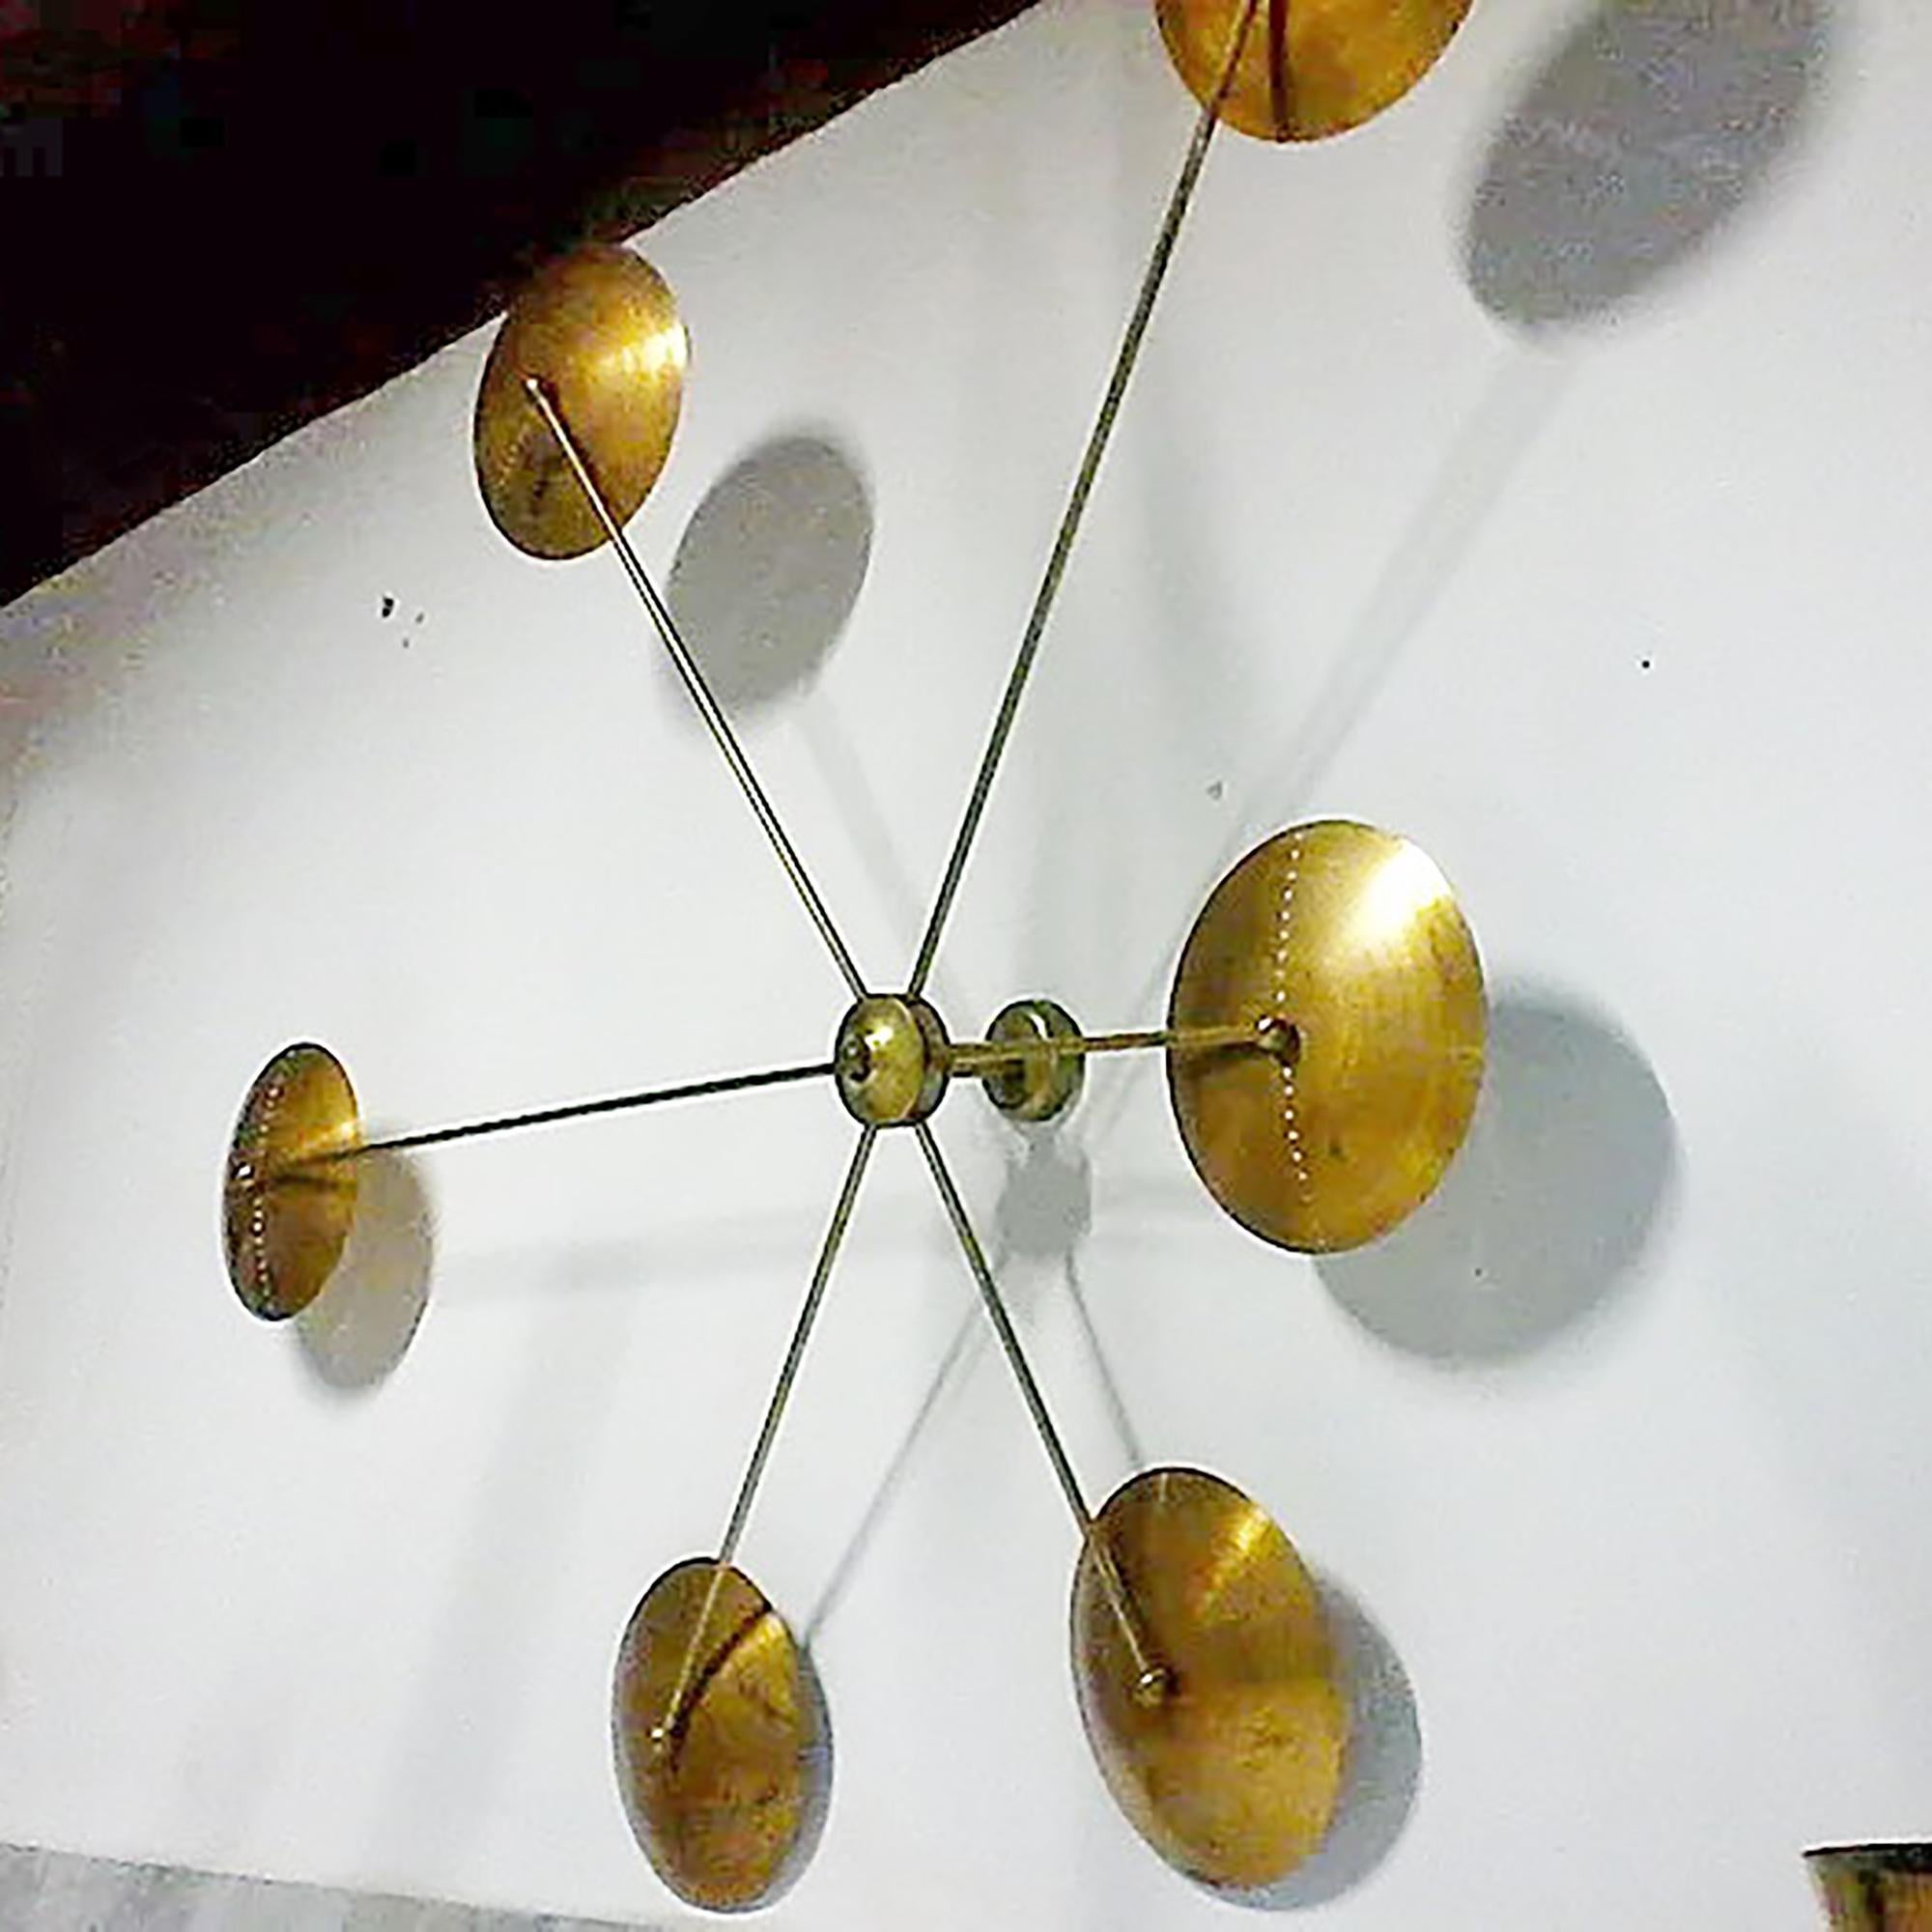 Italian Brass Spider Ceiling or Wall Light in Midcentury Style For Sale 4